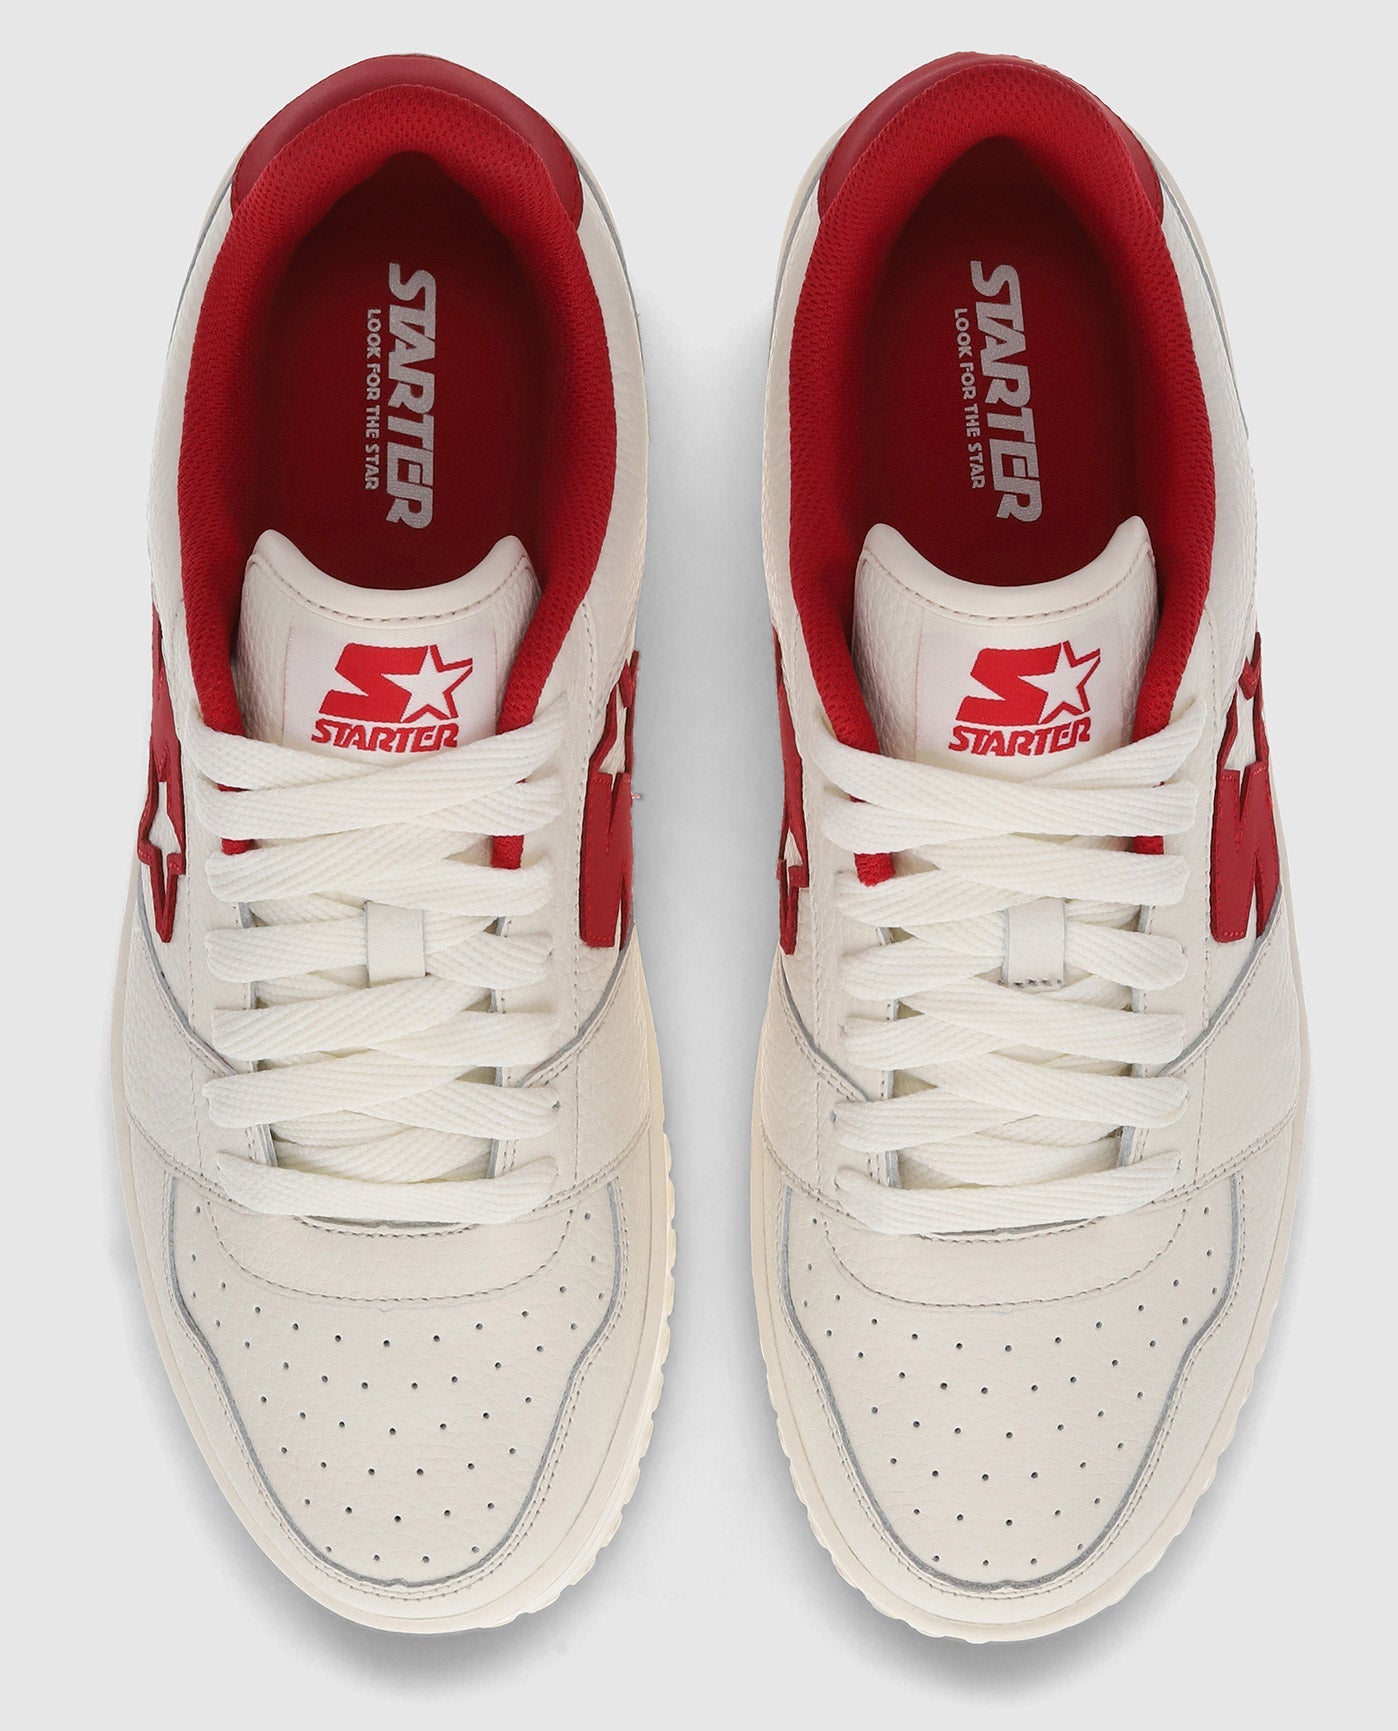 Top angle of Red and Off White Starter LFS 1 Sneakers | Red Off White